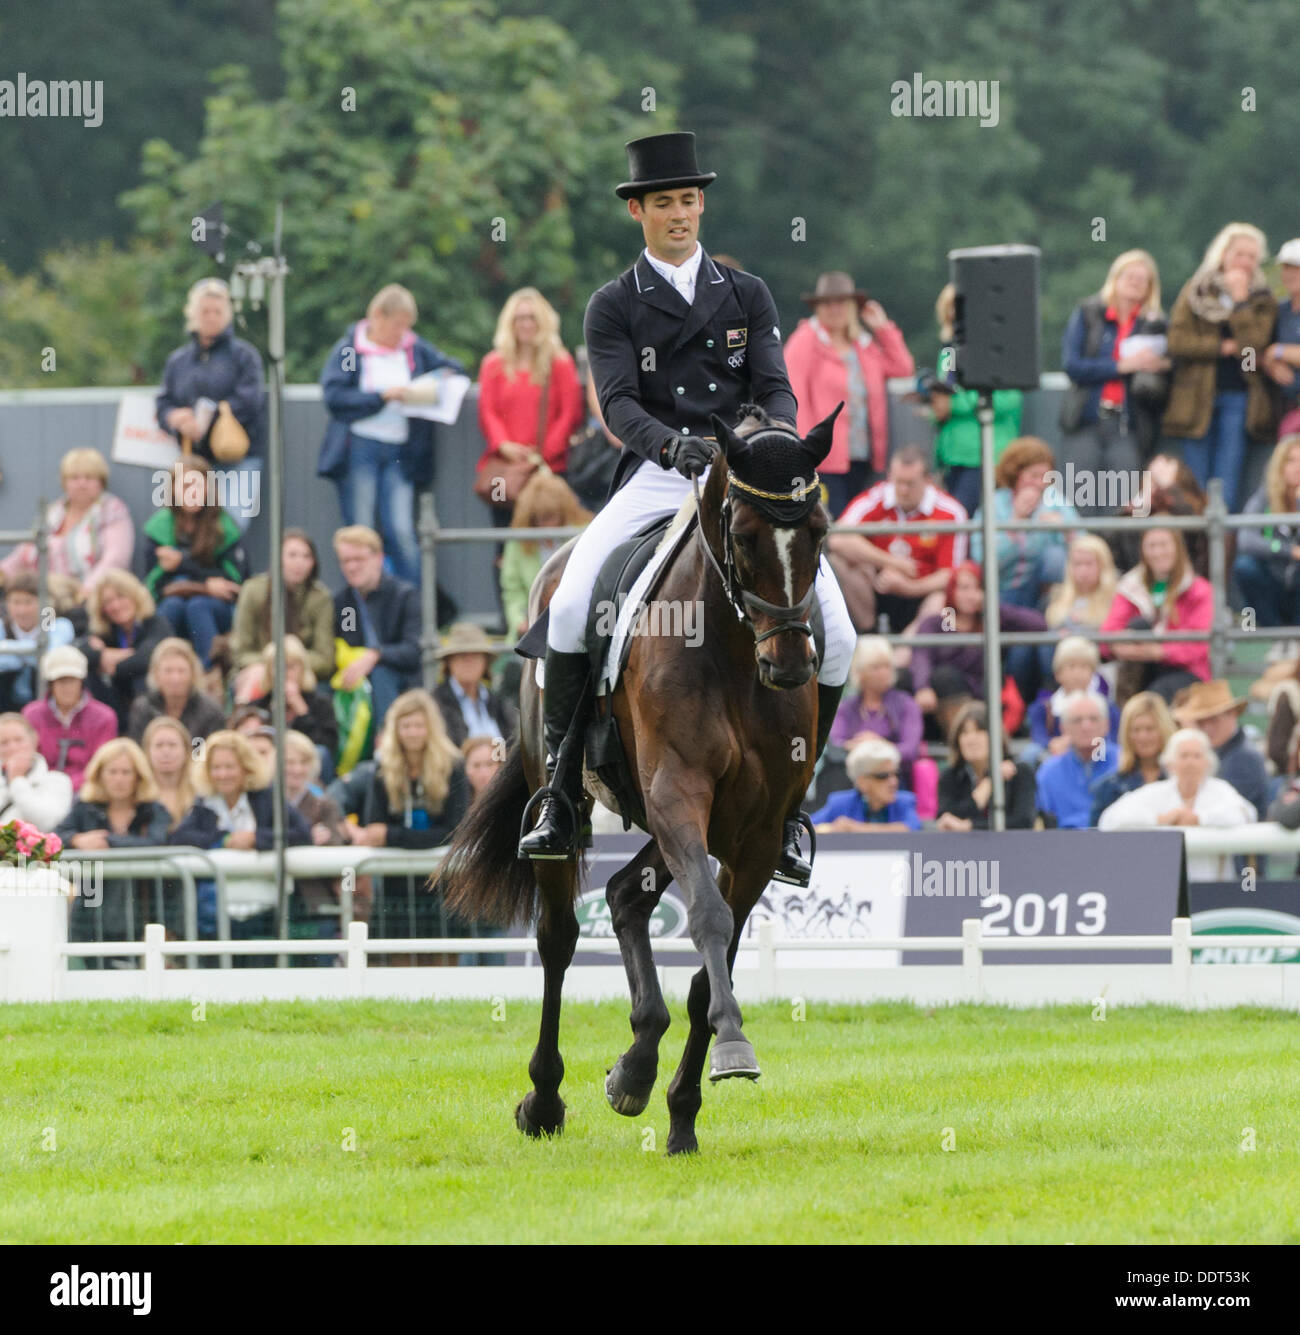 Burghley Horse Trials, Stamford, Lincolnshire, UK. 6th September 2013. Jonathan Paget and CLIFTON PROMISE - The Dressage phase. Credit:  Nico Morgan/Alamy Live News Stock Photo